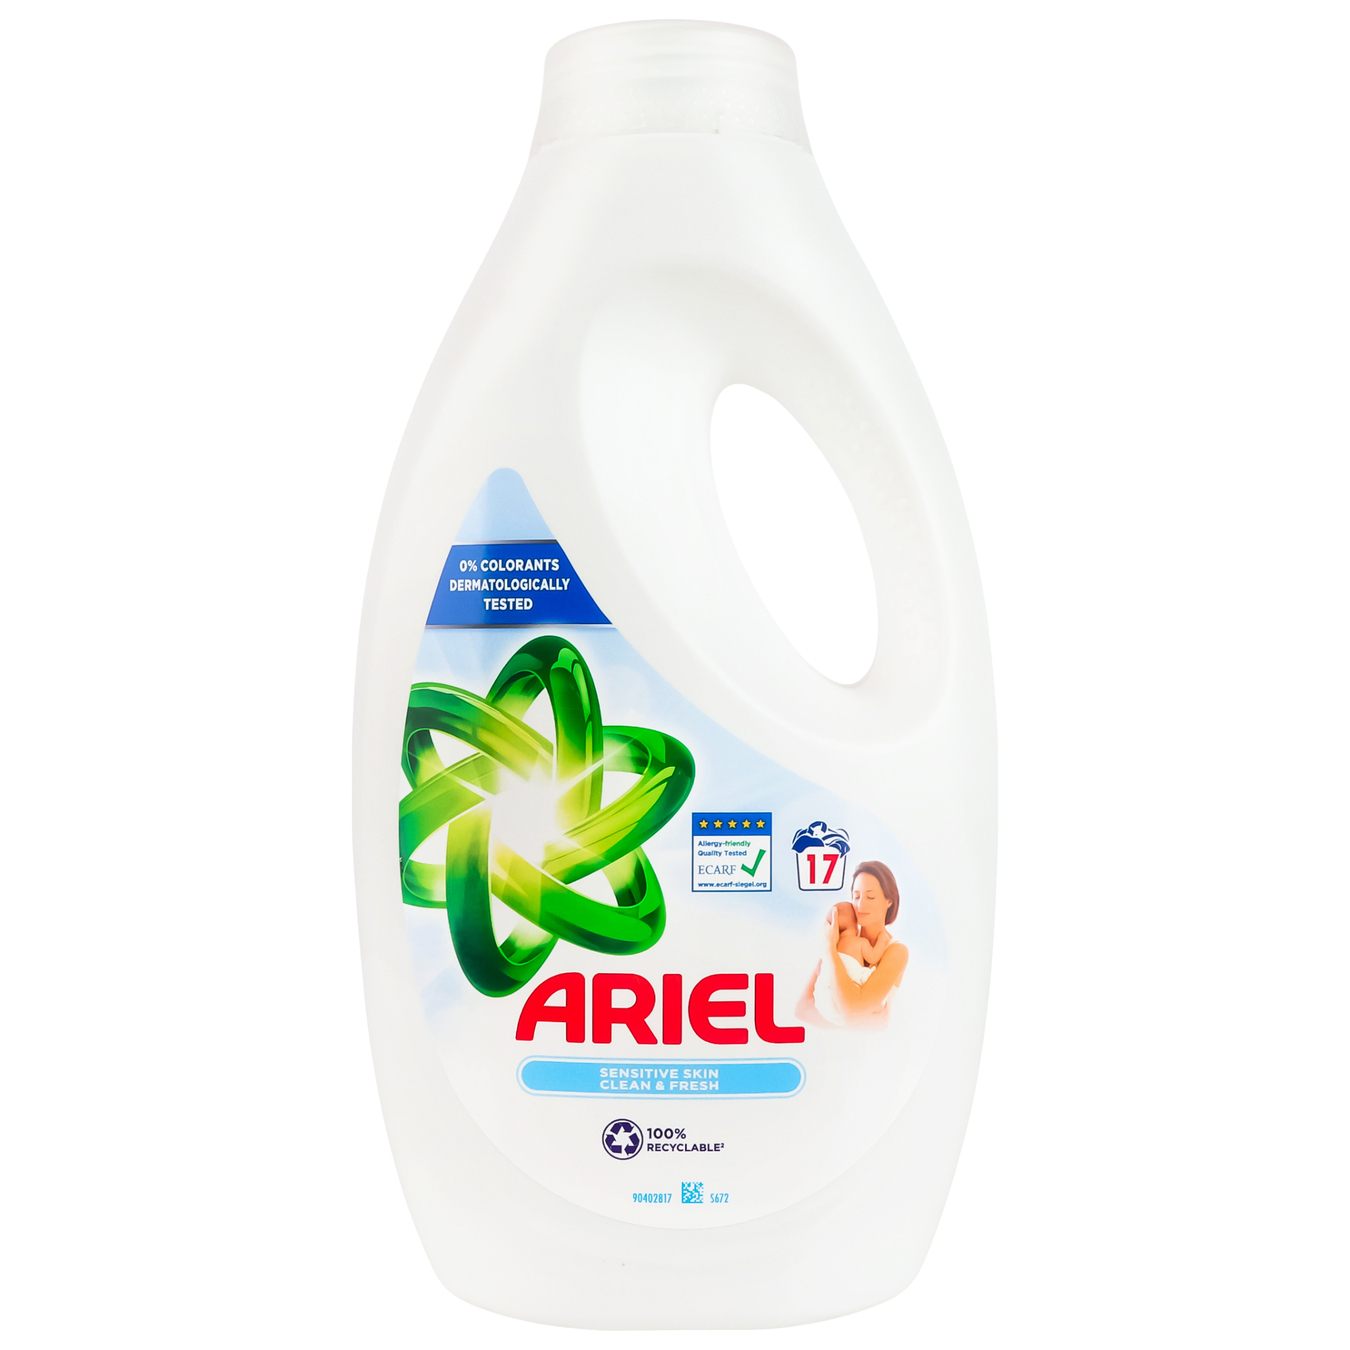 Washing gel for sensitive skin Ariel purity and freshness 850 ml